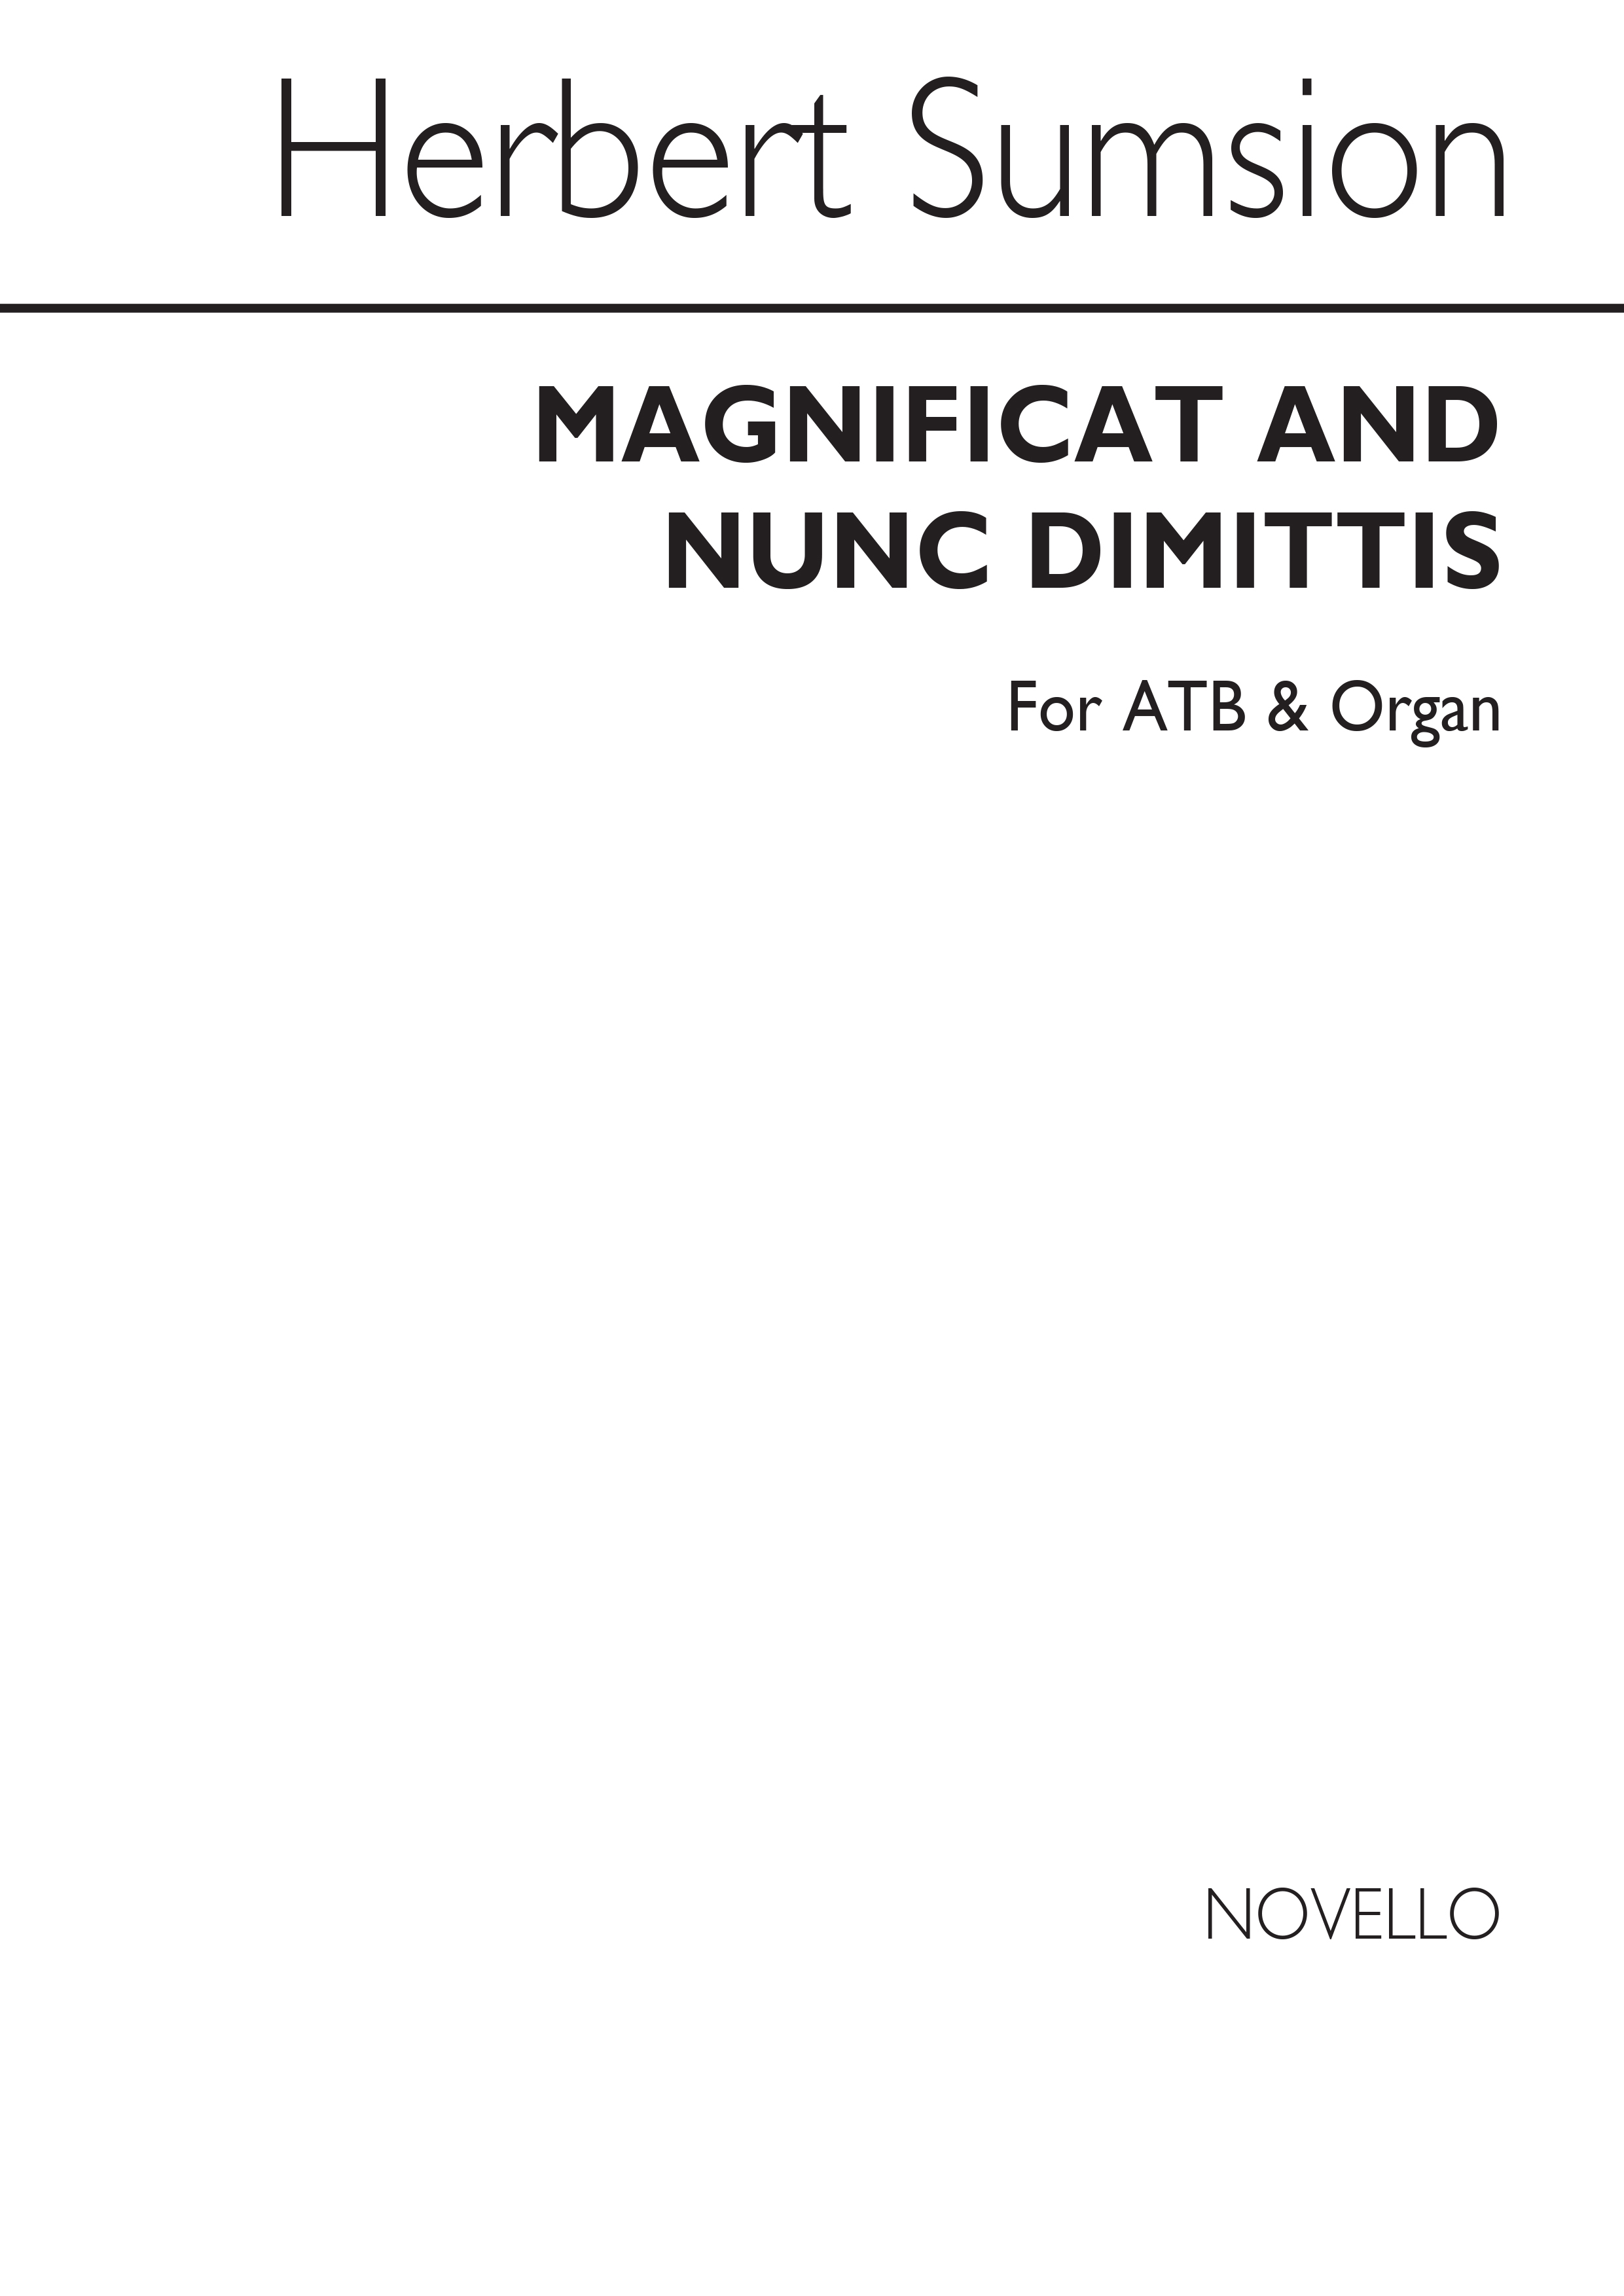 Herbert Sumsion: Magnificat And Nunc Dimittis In G (ATB): Men's Voices: Vocal